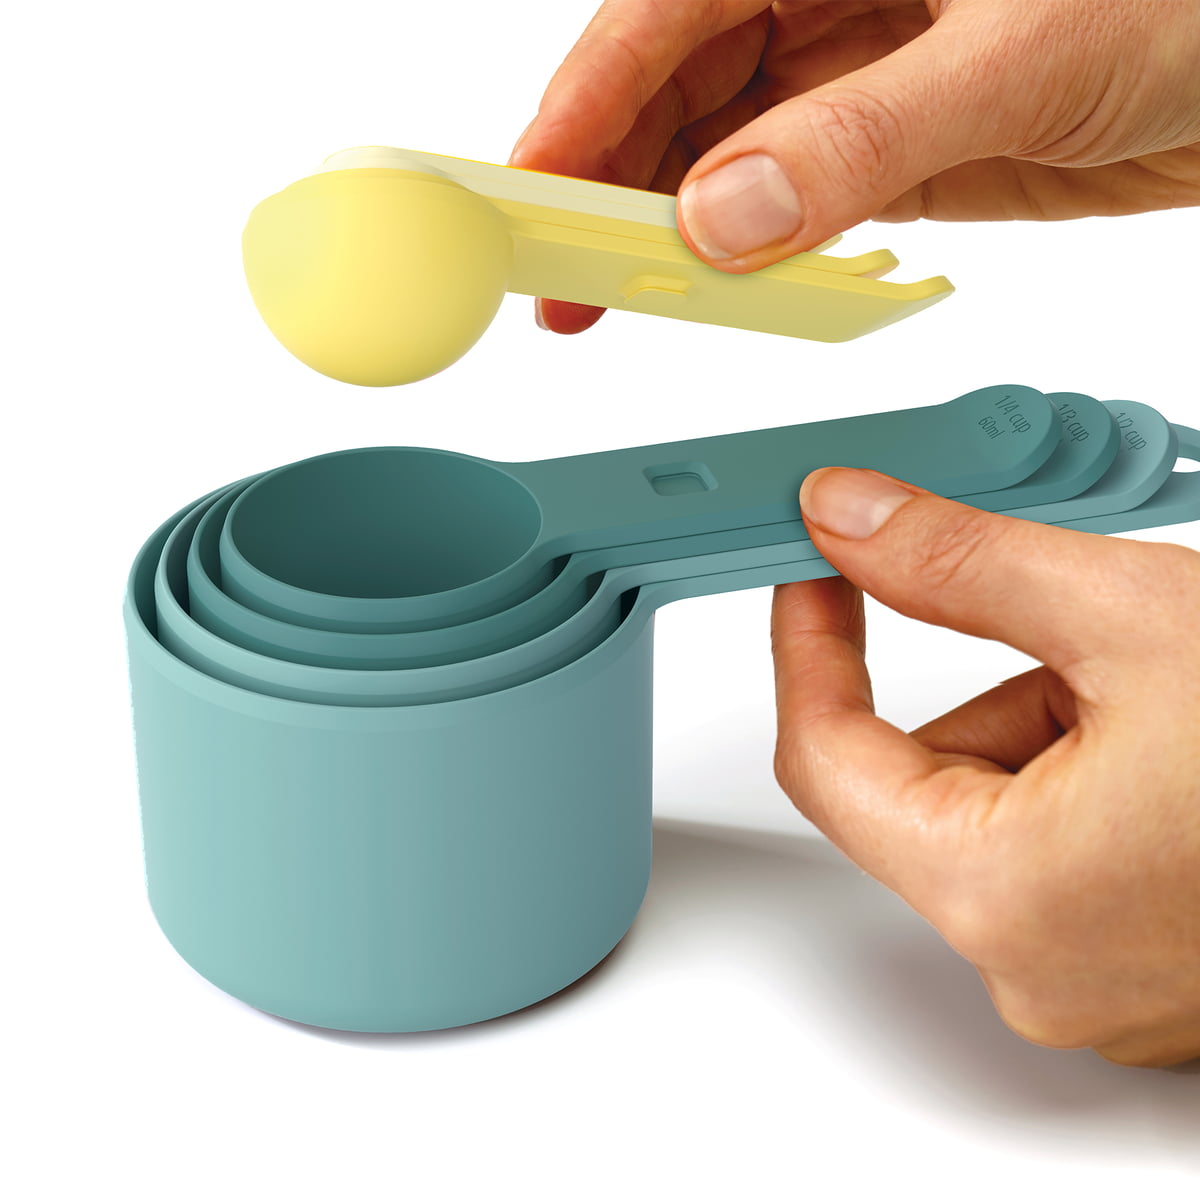  Set of 6 Measuring Cups and Spoons - Space Saving